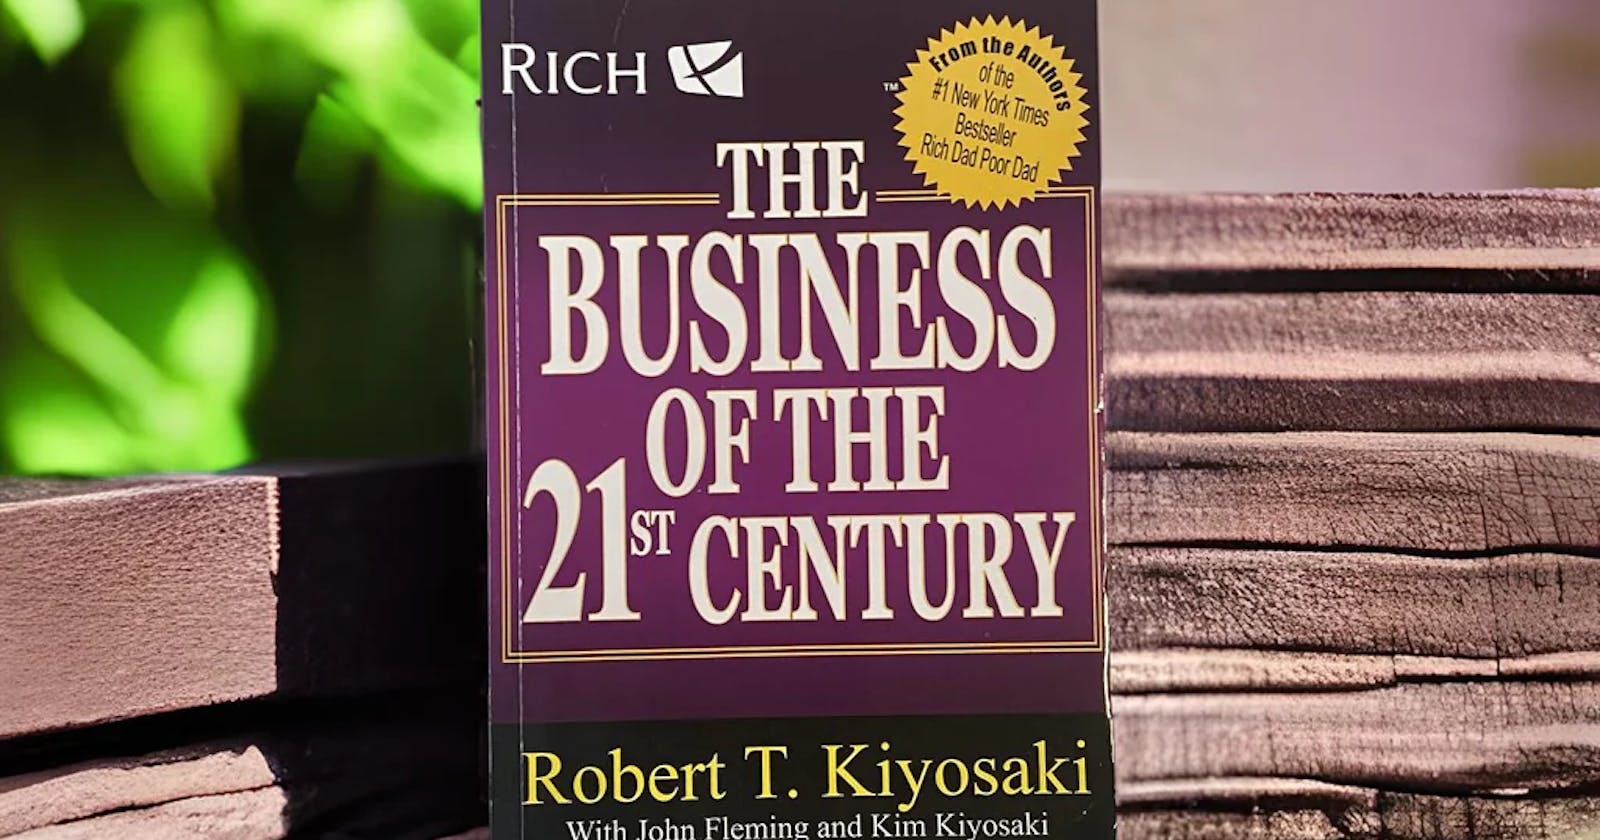 Insights from The Business of The 21st Century